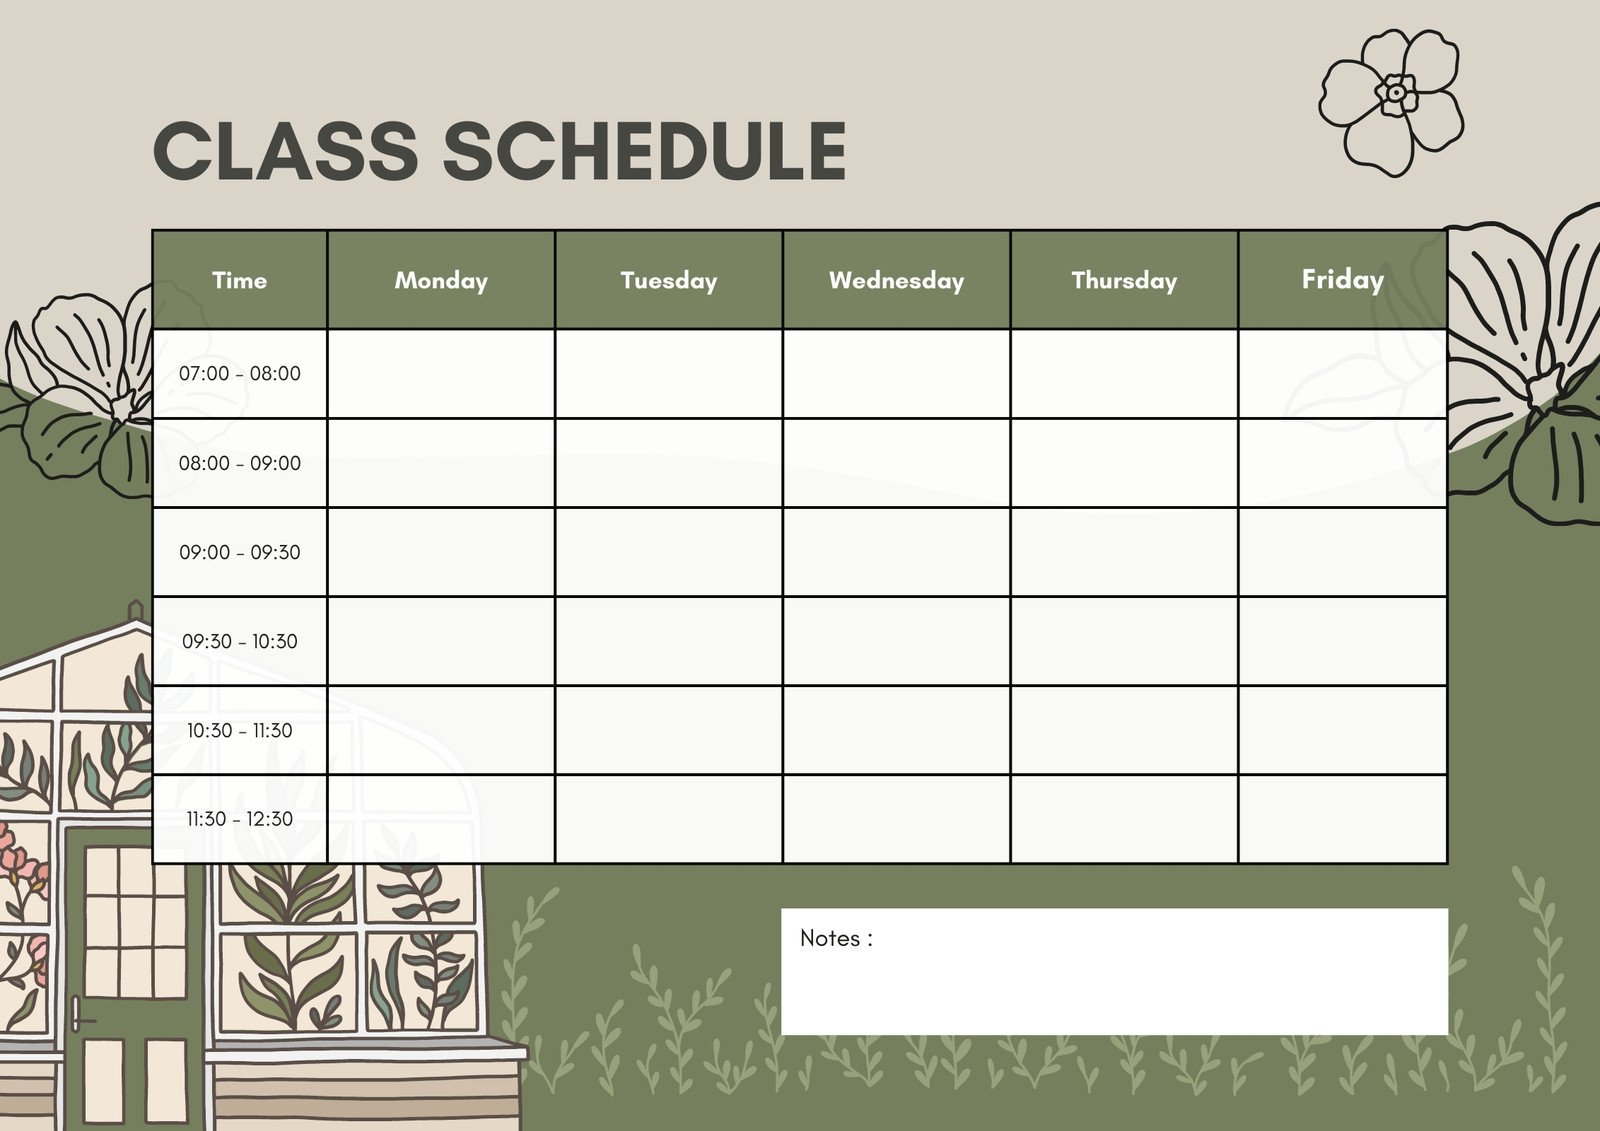 Timetable Photos, Download The BEST Free Timetable Stock Photos & HD Images